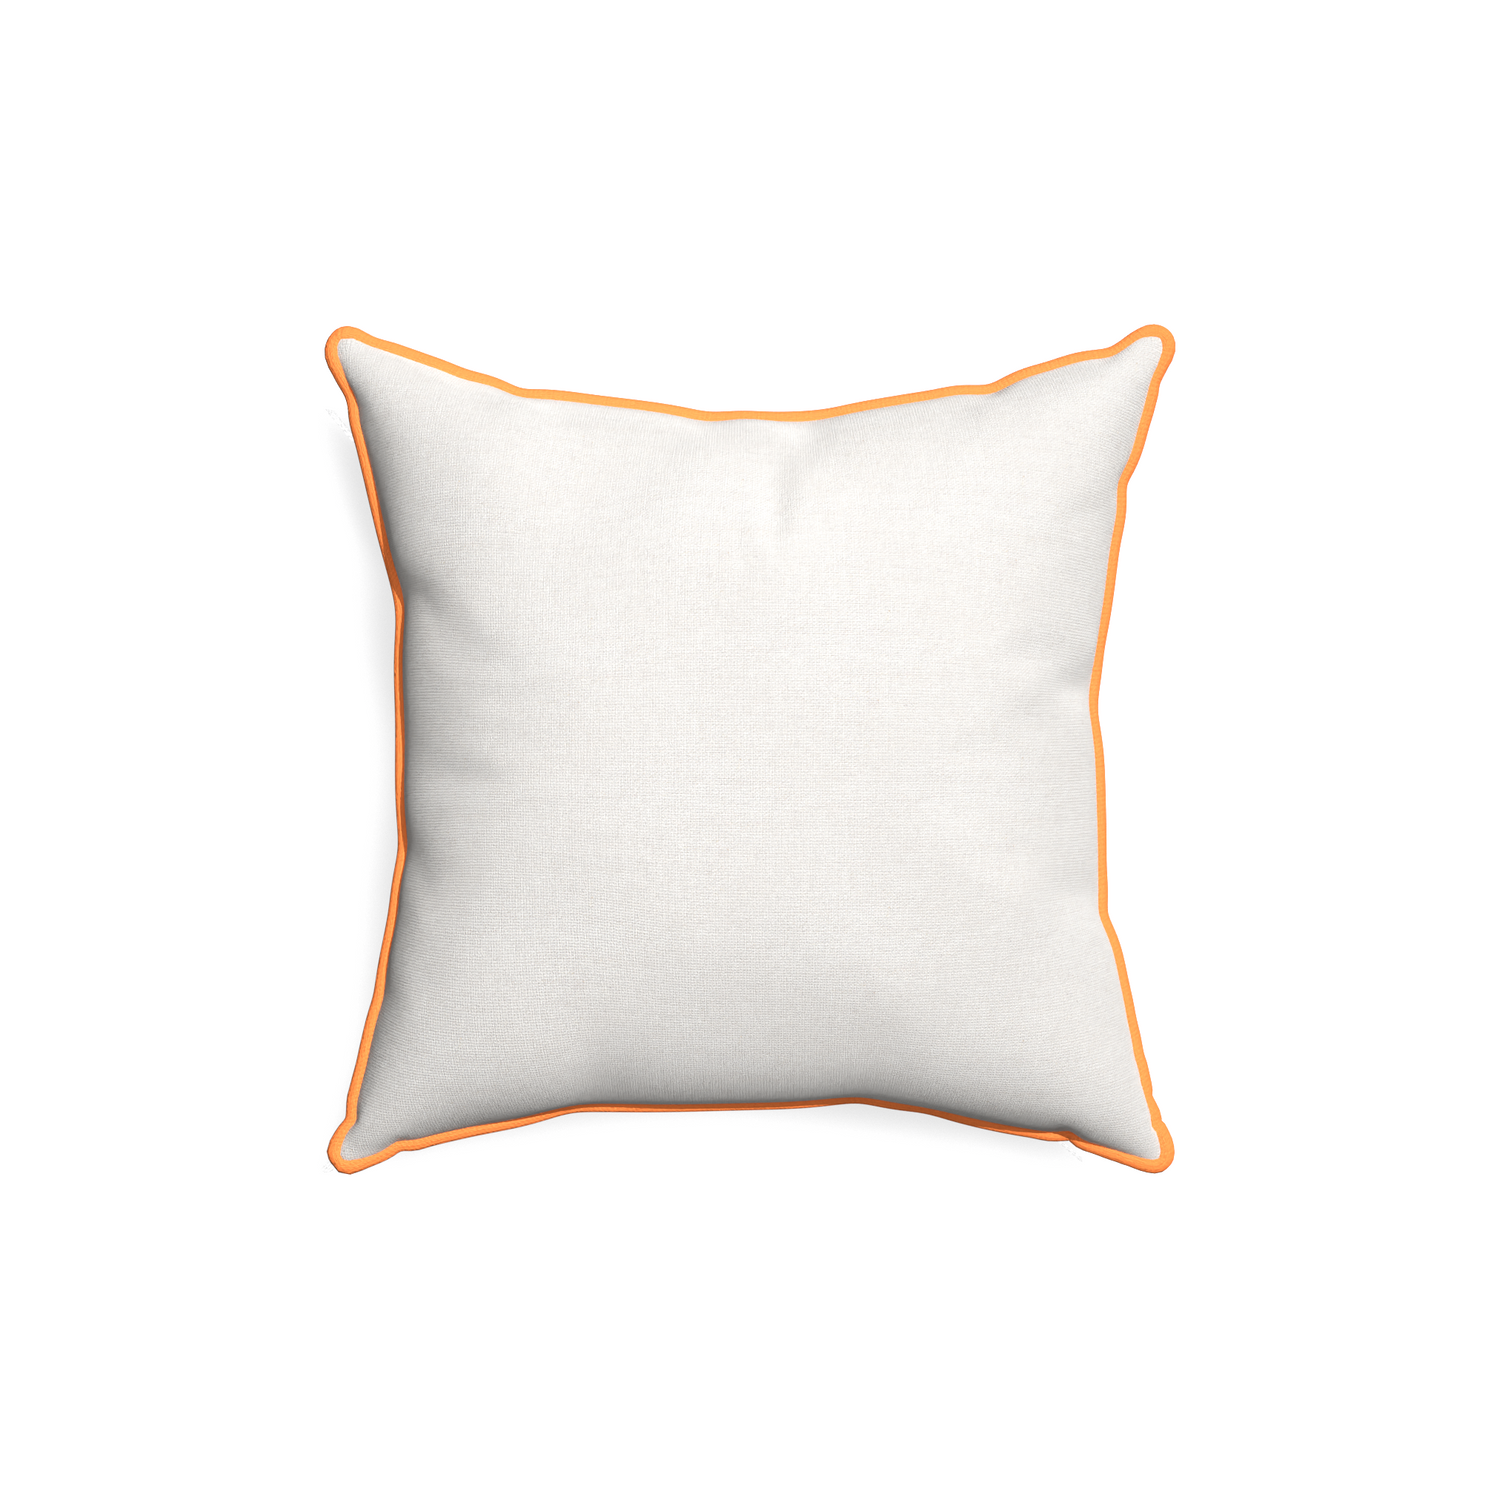 18-square flour custom pillow with clementine piping on white background